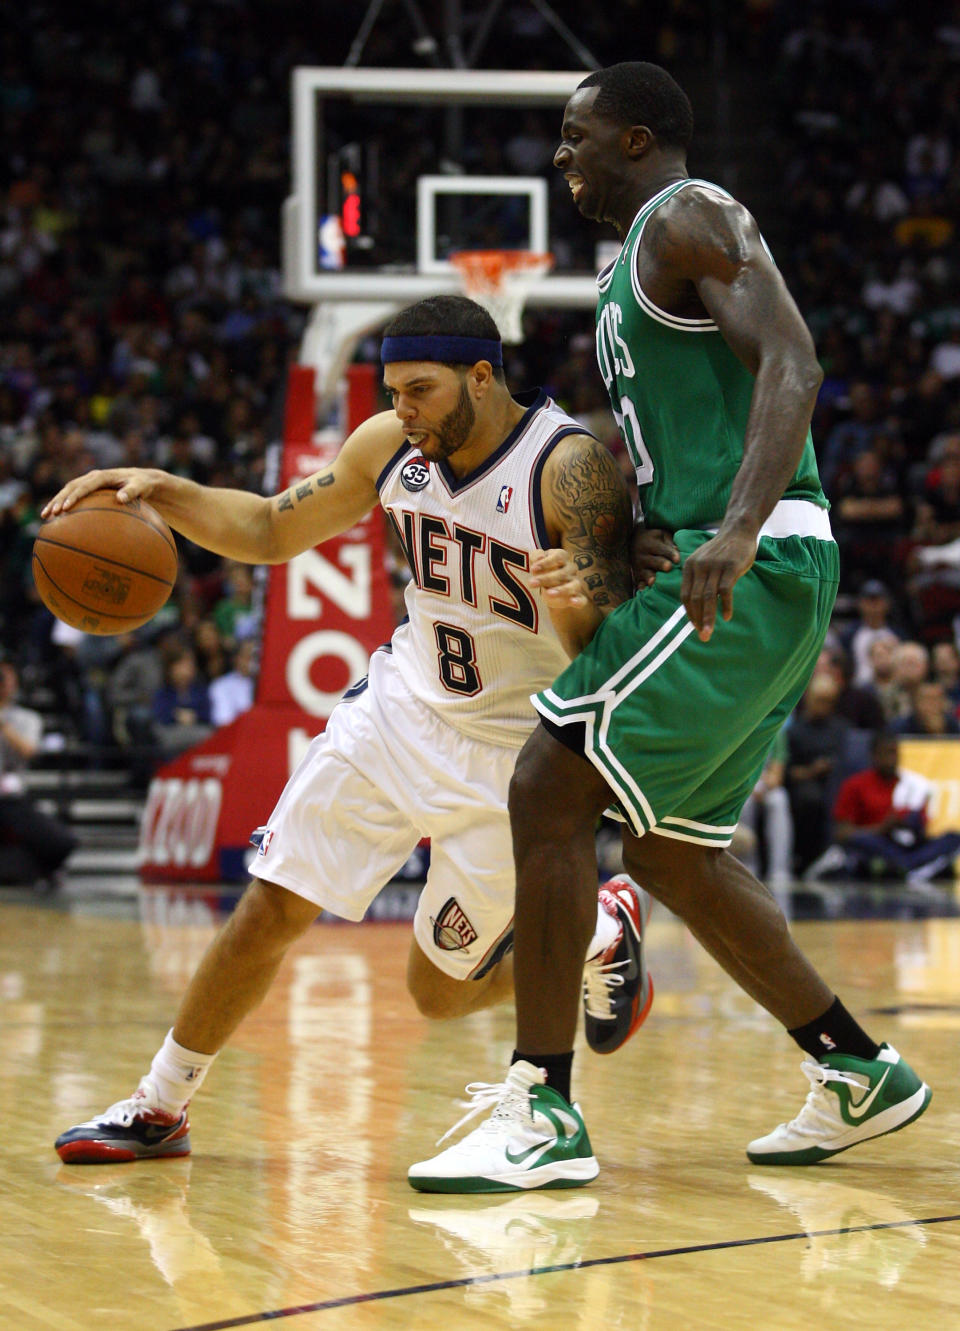 NEWARK, NJ - APRIL 14: Deron Williams #8 of the New Jersey Nets drives in the secon dhalf against Brandon Bass #30 of the Boston Celtics at Prudential Center on April 14, 2012 in Newark, New Jersey. NOTE TO USER: User expressly acknowledges and agrees that, by downloading and or using this photograph, User is consenting to the terms and conditions of the Getty Images License Agreement. (Photo by Chris Chambers/Getty Images)